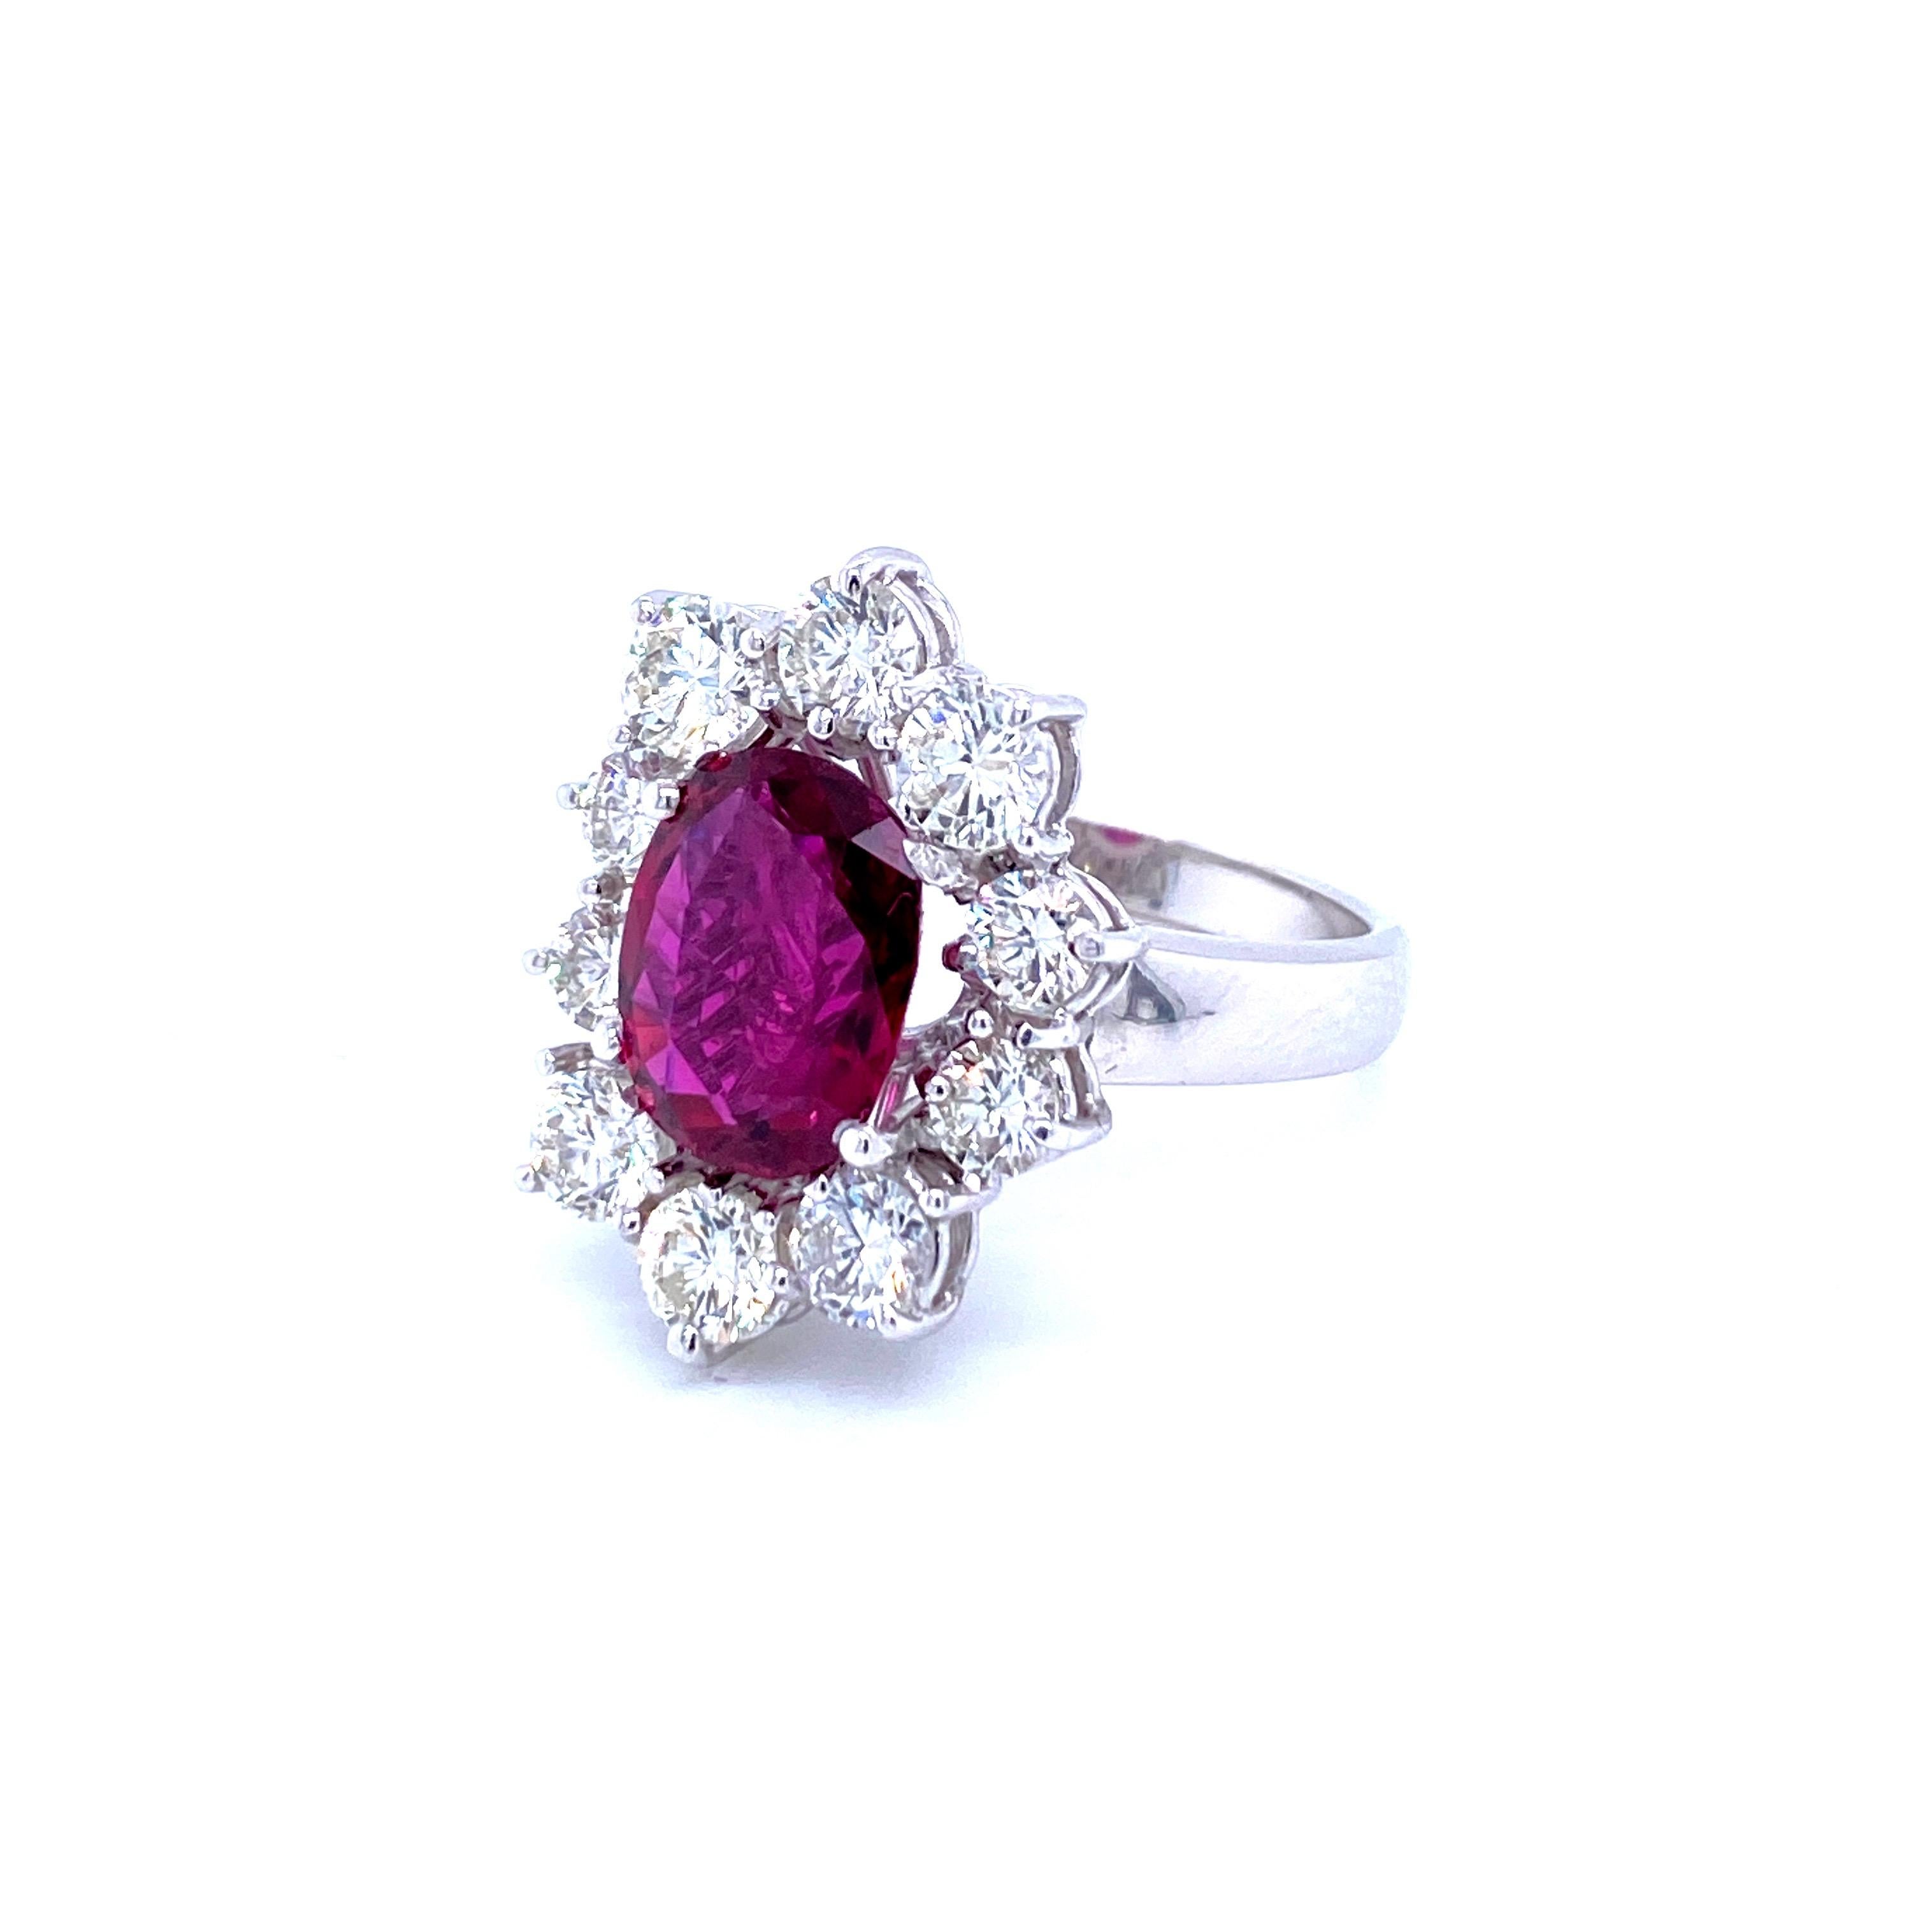 This beautiful 18k white Gold cluster ring features a 3.81 Carat oval-cut Ruby, origin Thailand, with a vibrant and rich purplish red color flanked by 10 round brilliant cut Diamonds for a total approx. weight of 3.00 carats color G  Vvs